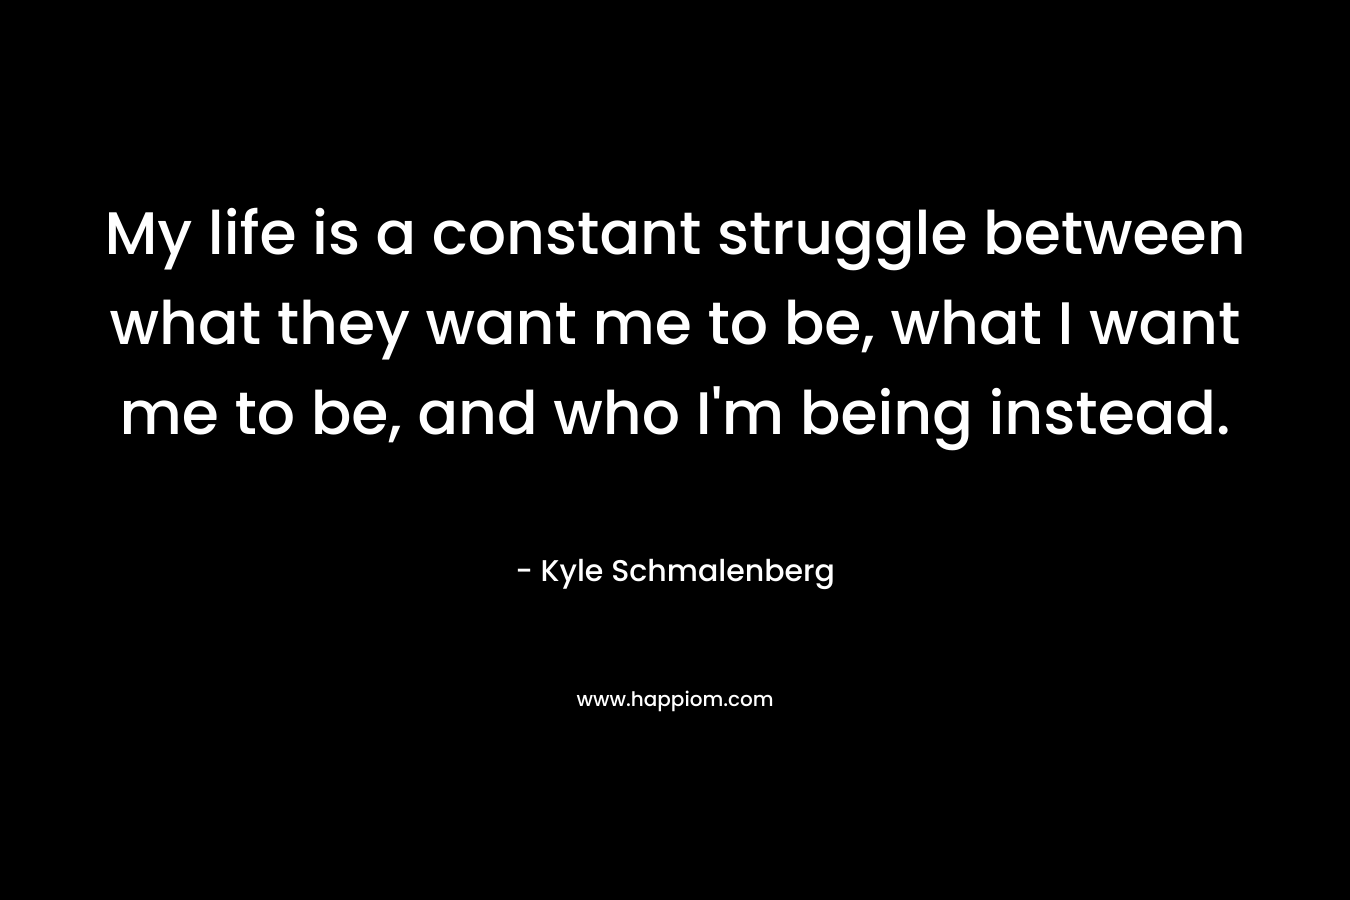 My life is a constant struggle between what they want me to be, what I want me to be, and who I’m being instead. – Kyle Schmalenberg